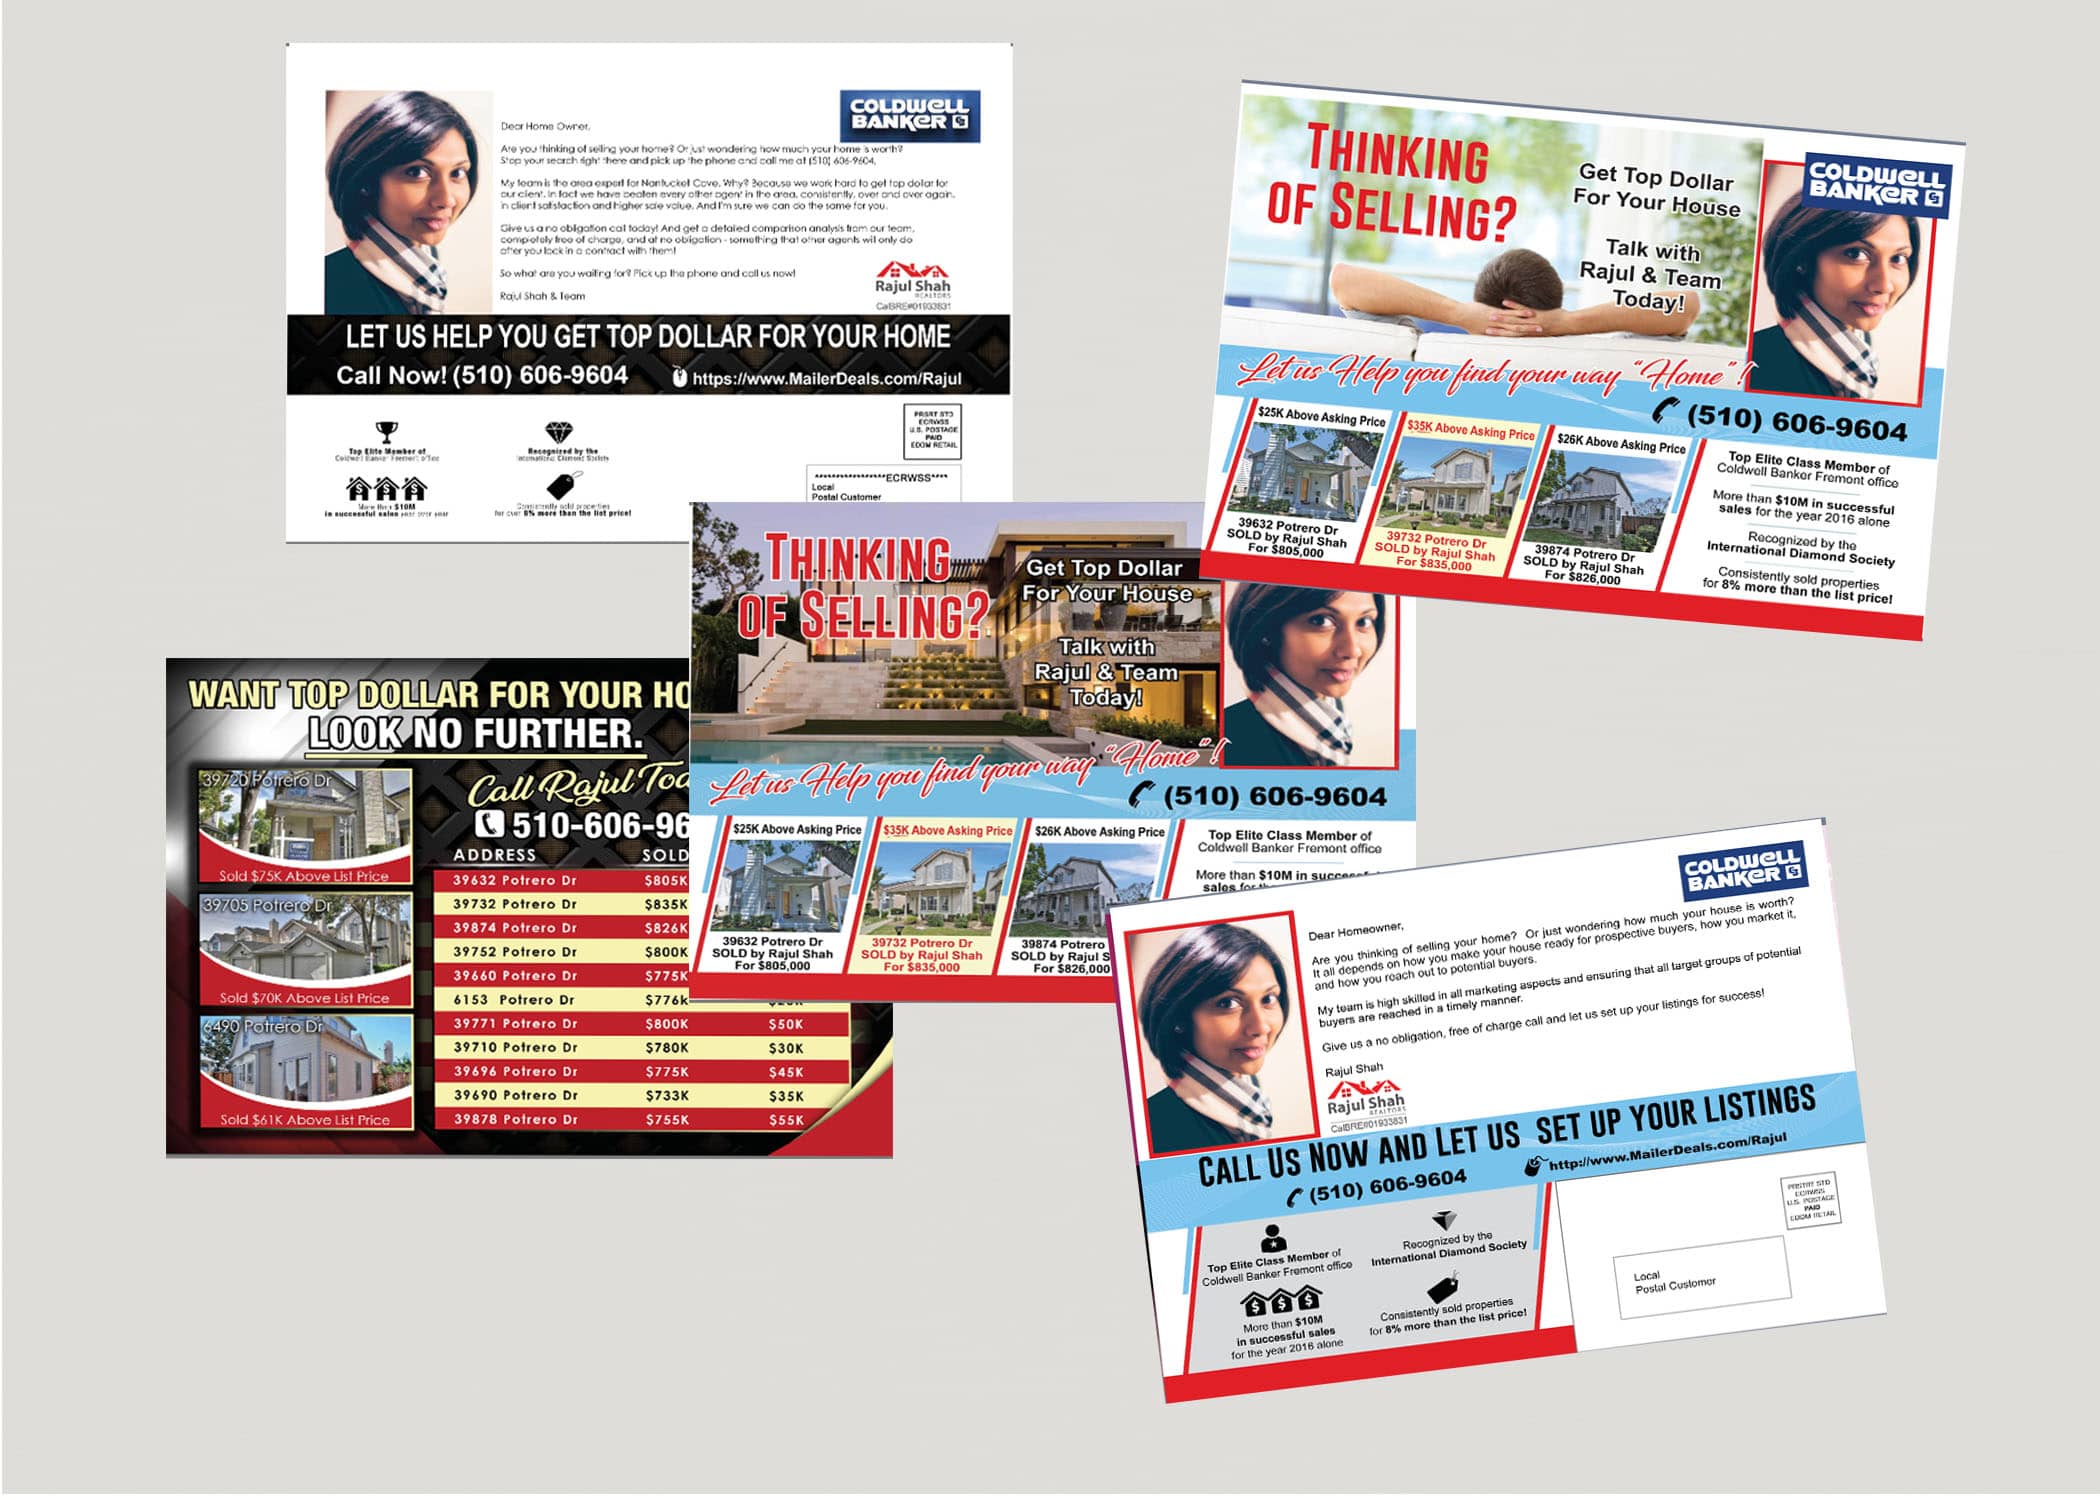 Rajul Shah Realtors Closes 6 Sales Within 3 Months using Every Door Direct Mail